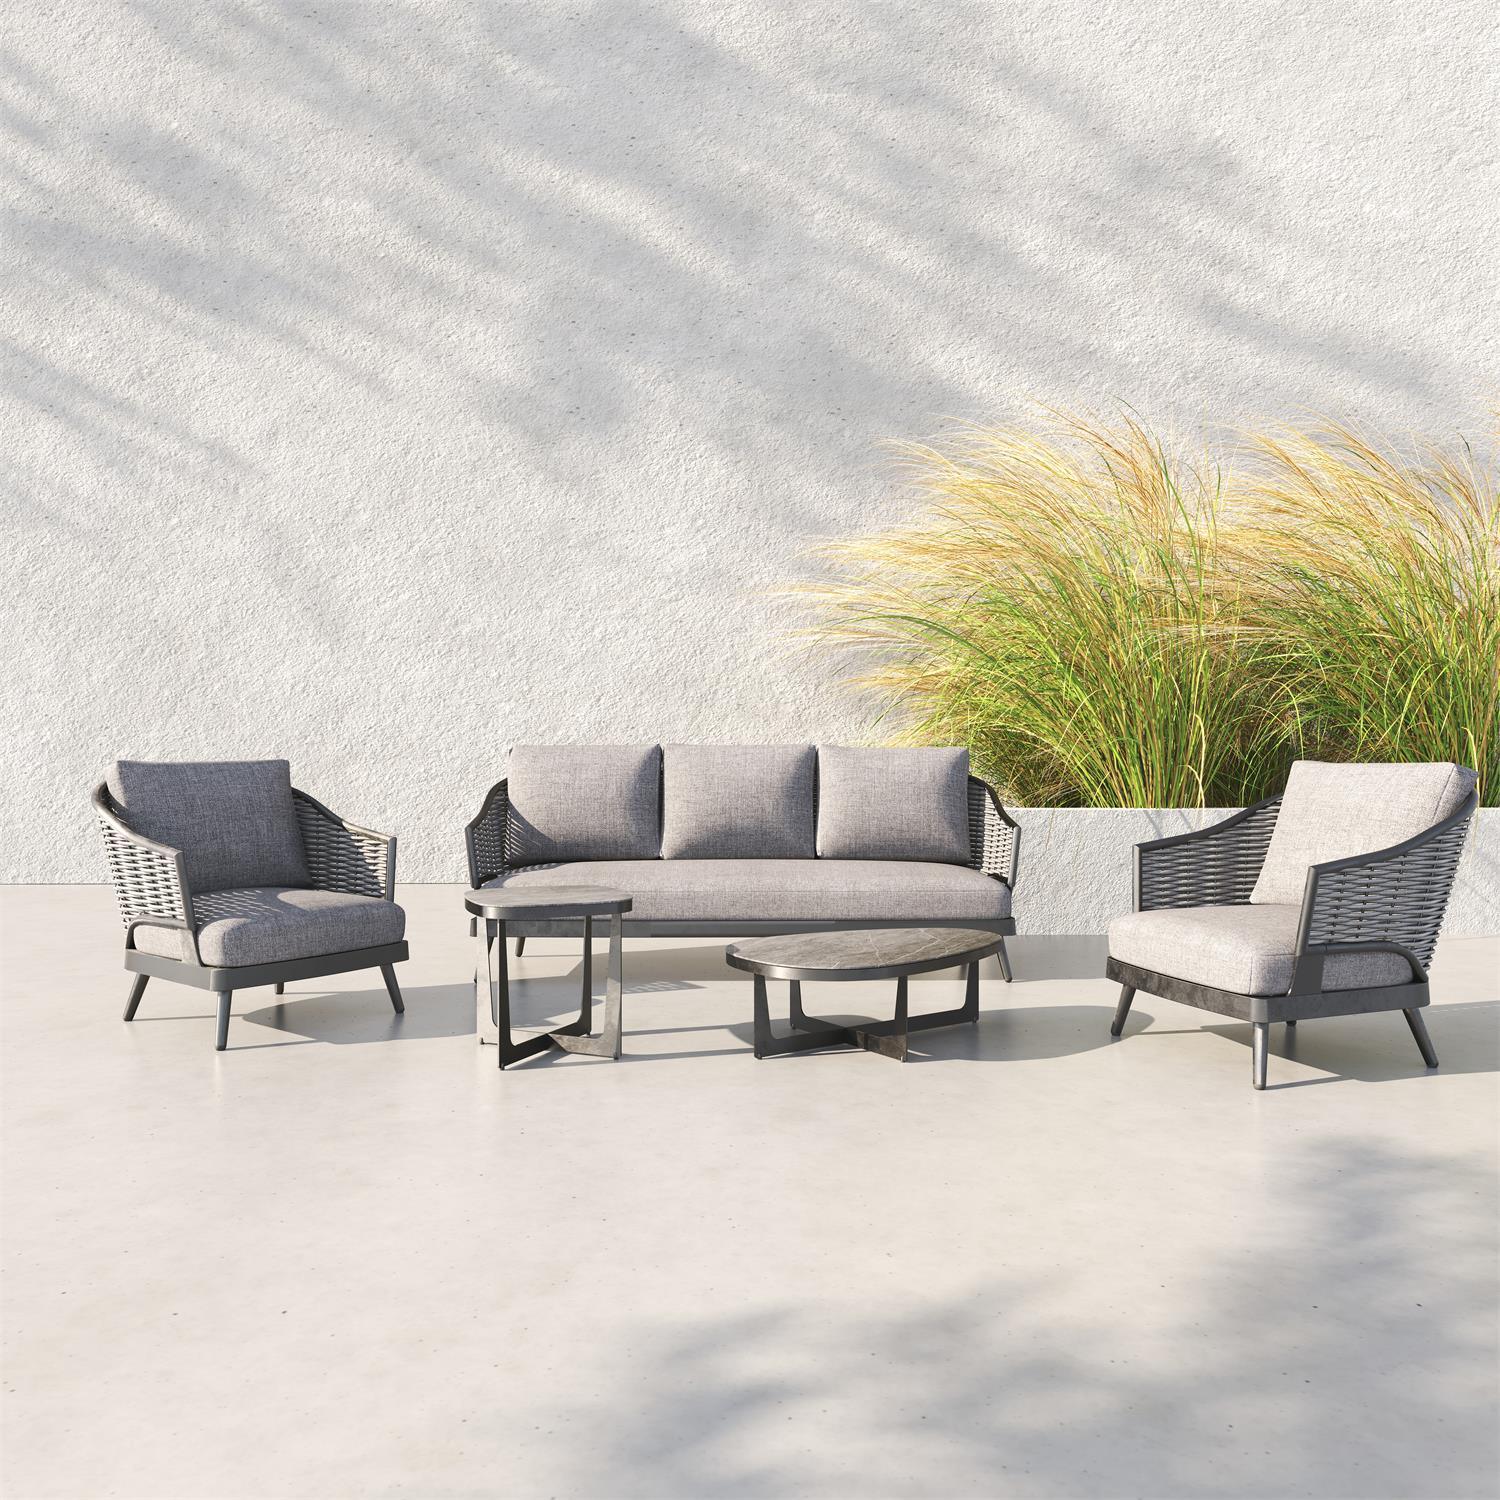 Burano Modern Wicker Outdoor Furniture, 5-Piece Grey wicker outdoor Sofa Set with aluminum frame, grey cushions, a three-seater sofa, 2 arm chairs , 1 mixed set of tables, put in a backyard- Jardina Furniture -1